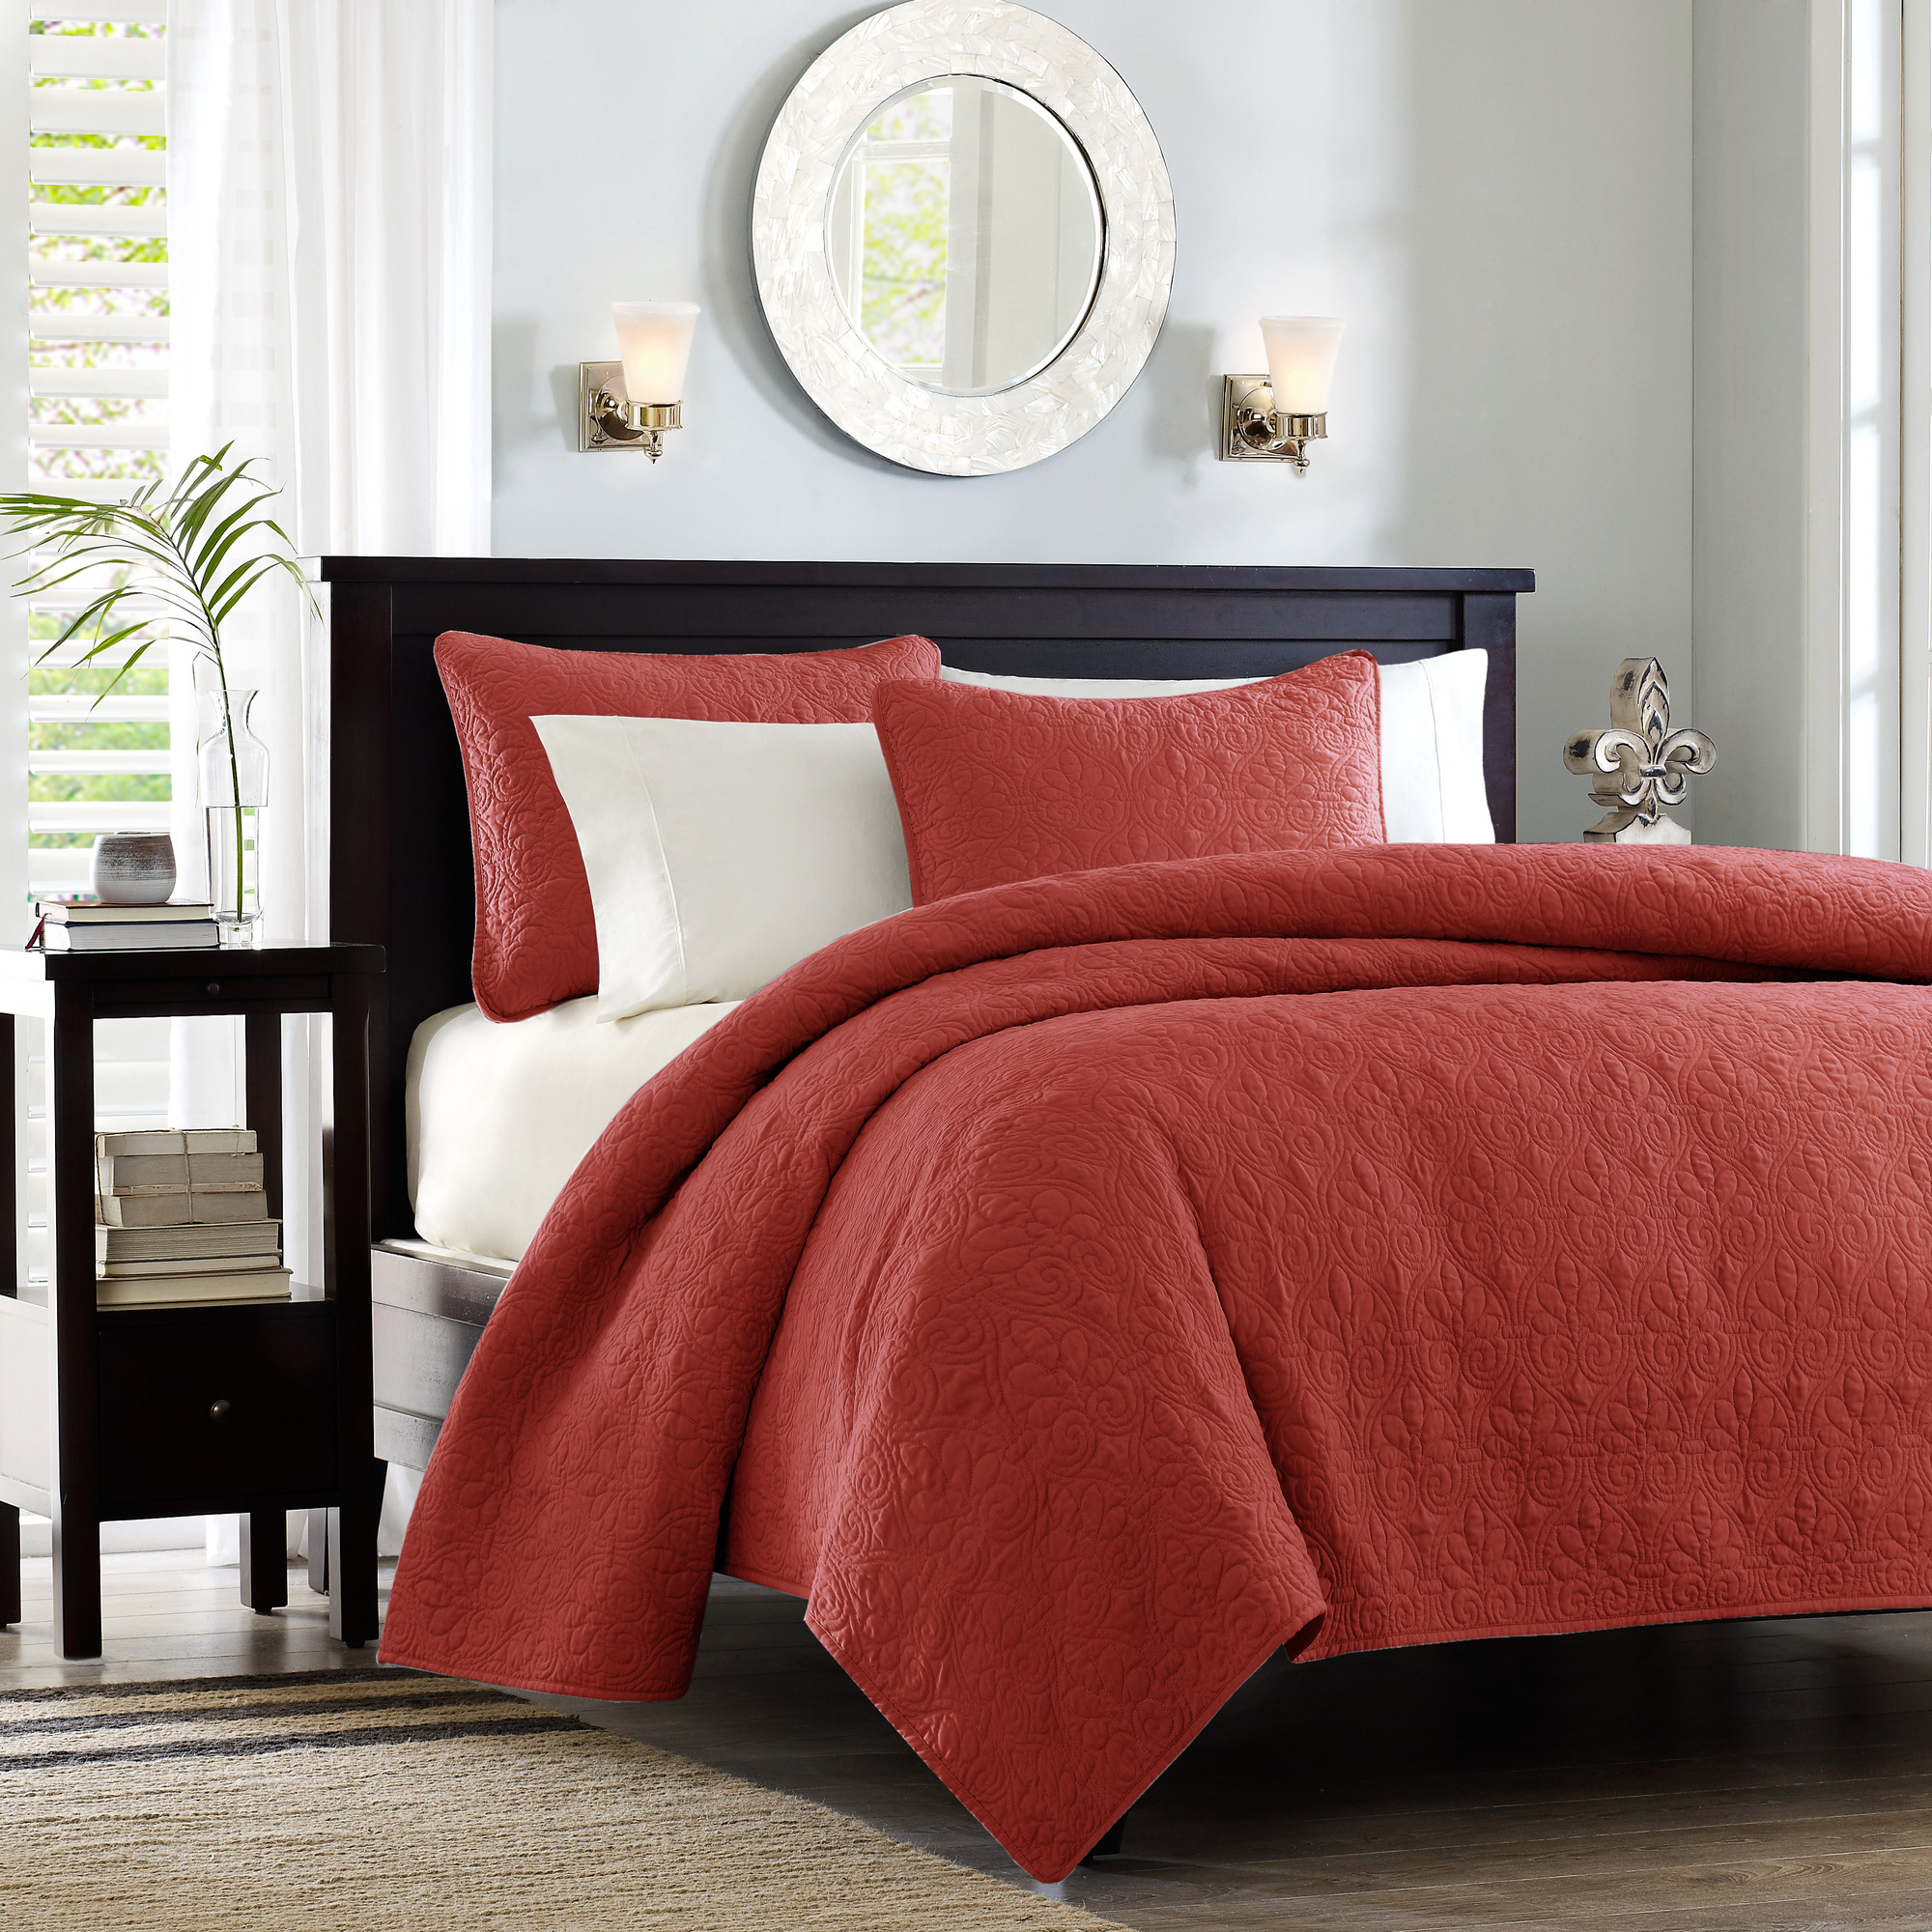 Home Essence Vancouver Super Soft Reversible Coverlet Set, Full/Queen, Red - image 1 of 13